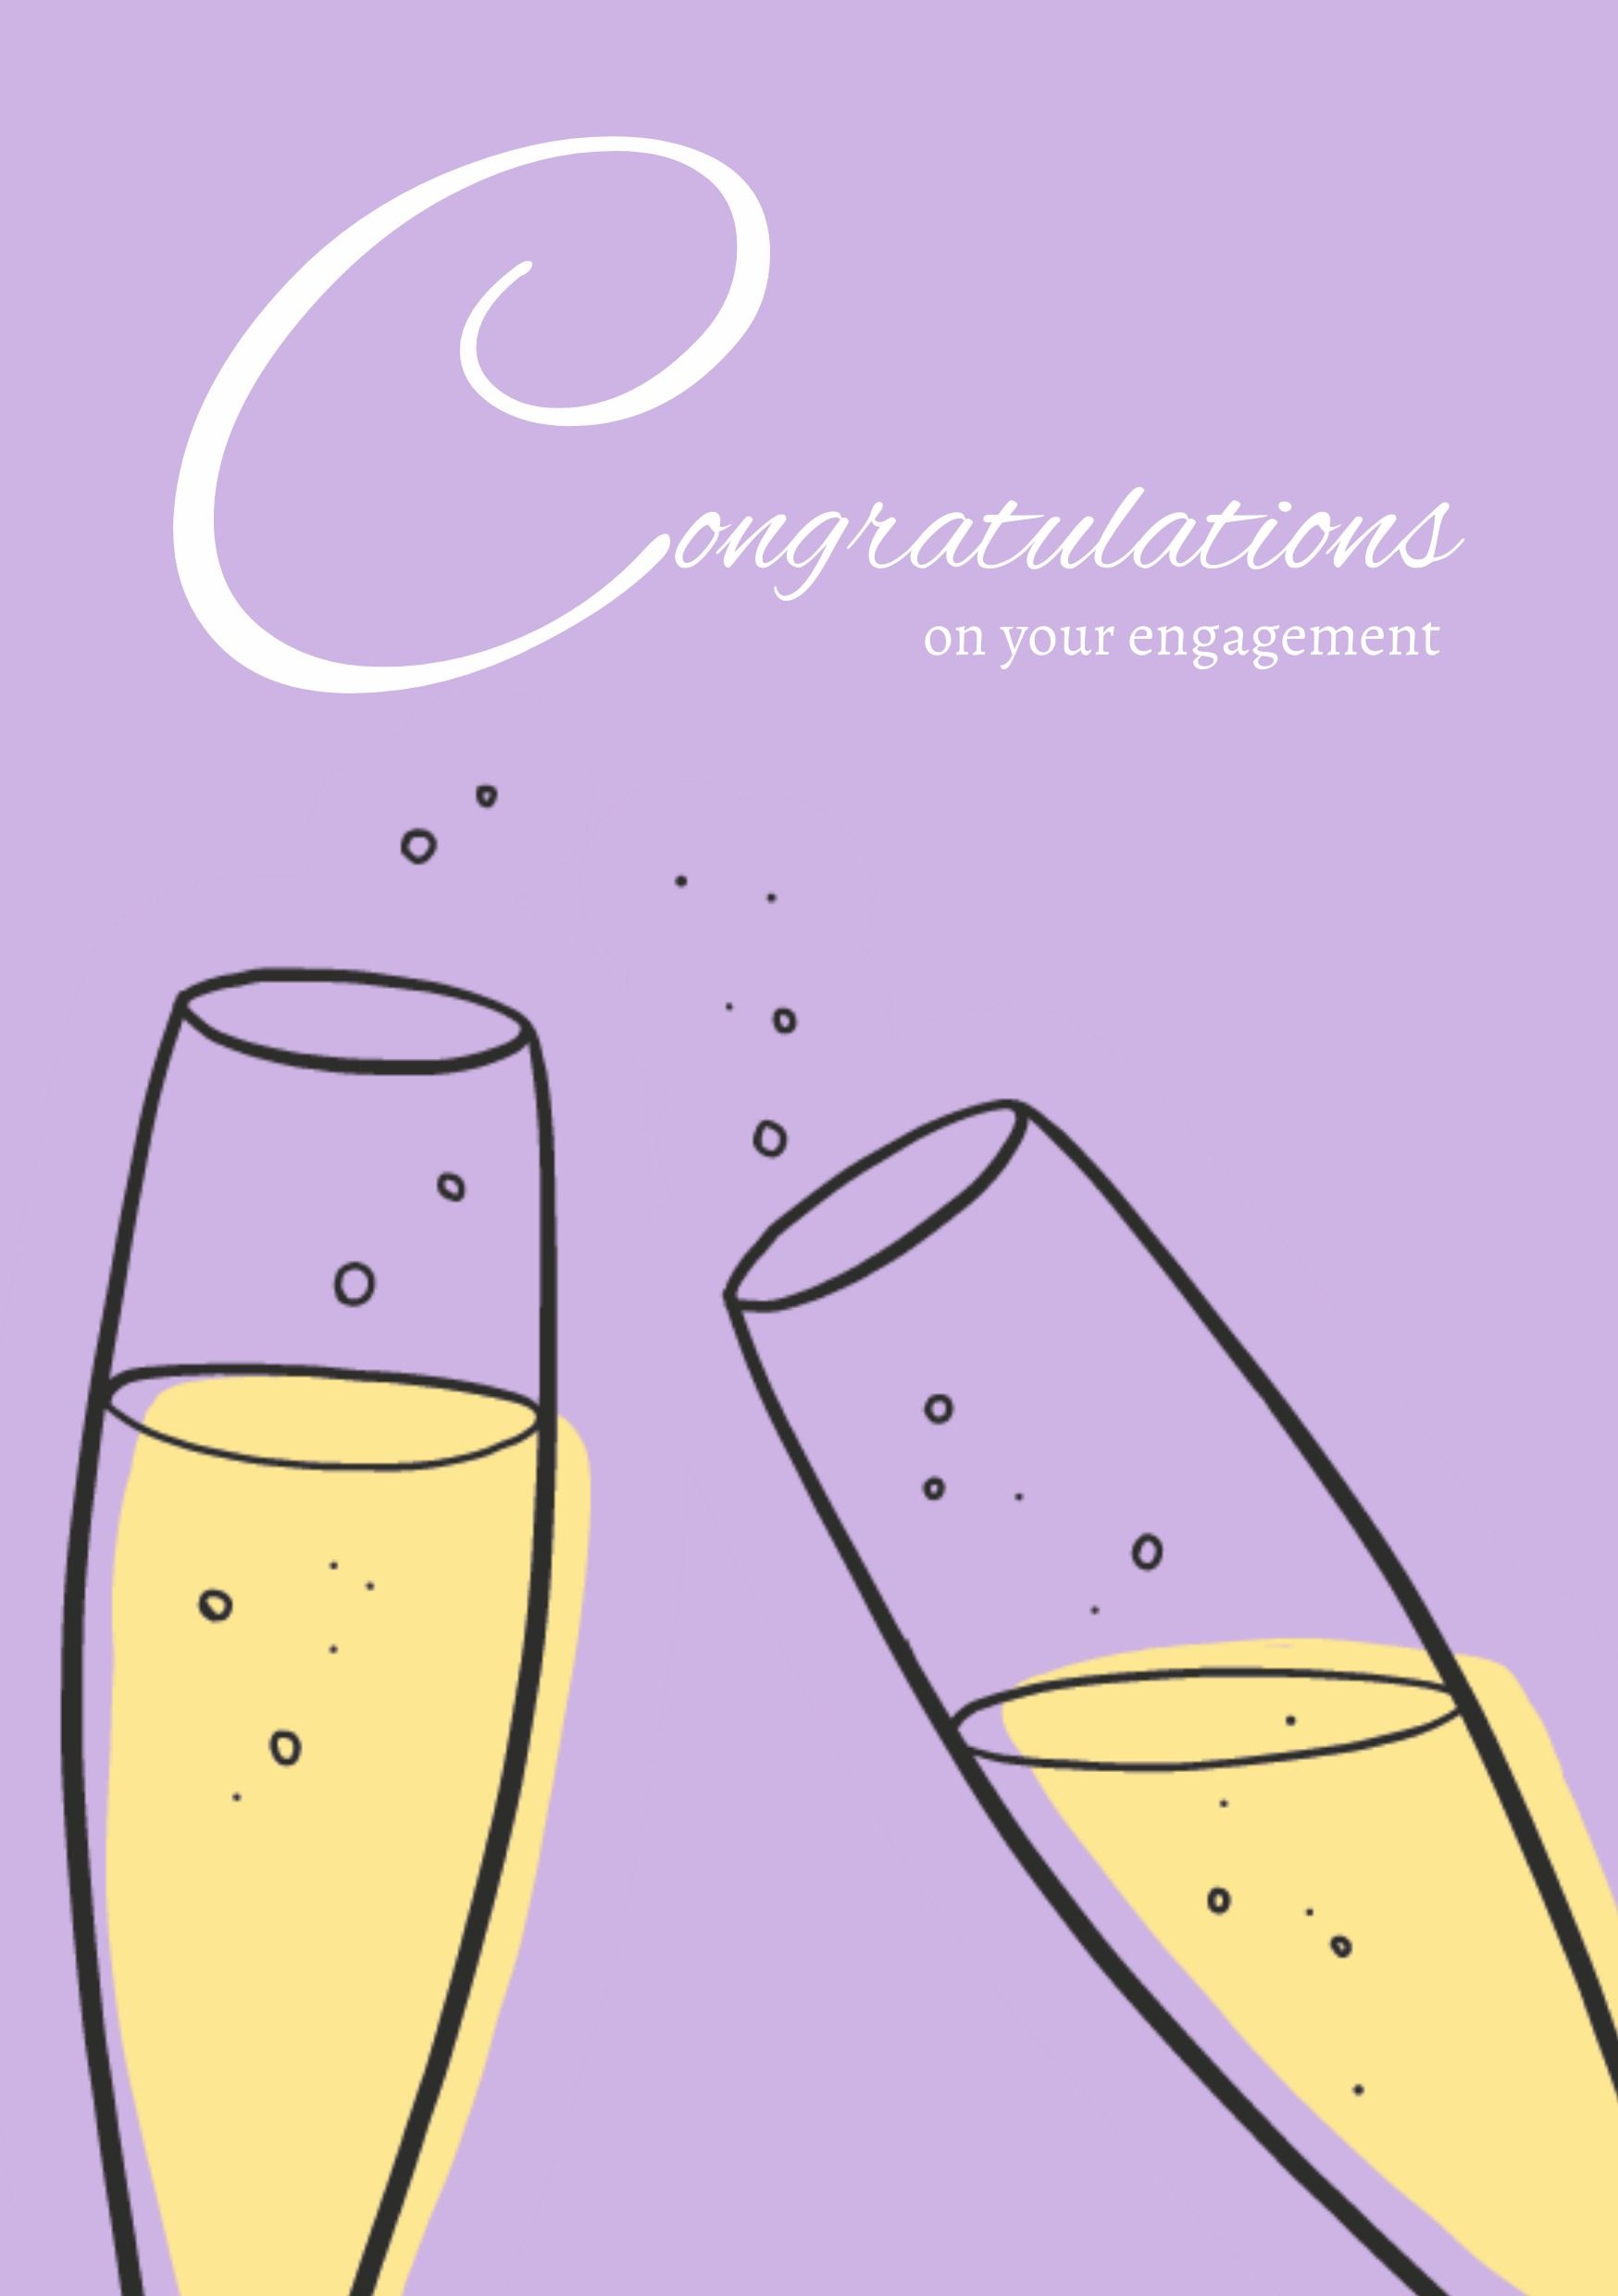 Purple wedding engagement congratulations card with script font in white and wine glasses illustrations - The complete guide to fonts: 5 essential types of fonts in typography - Image